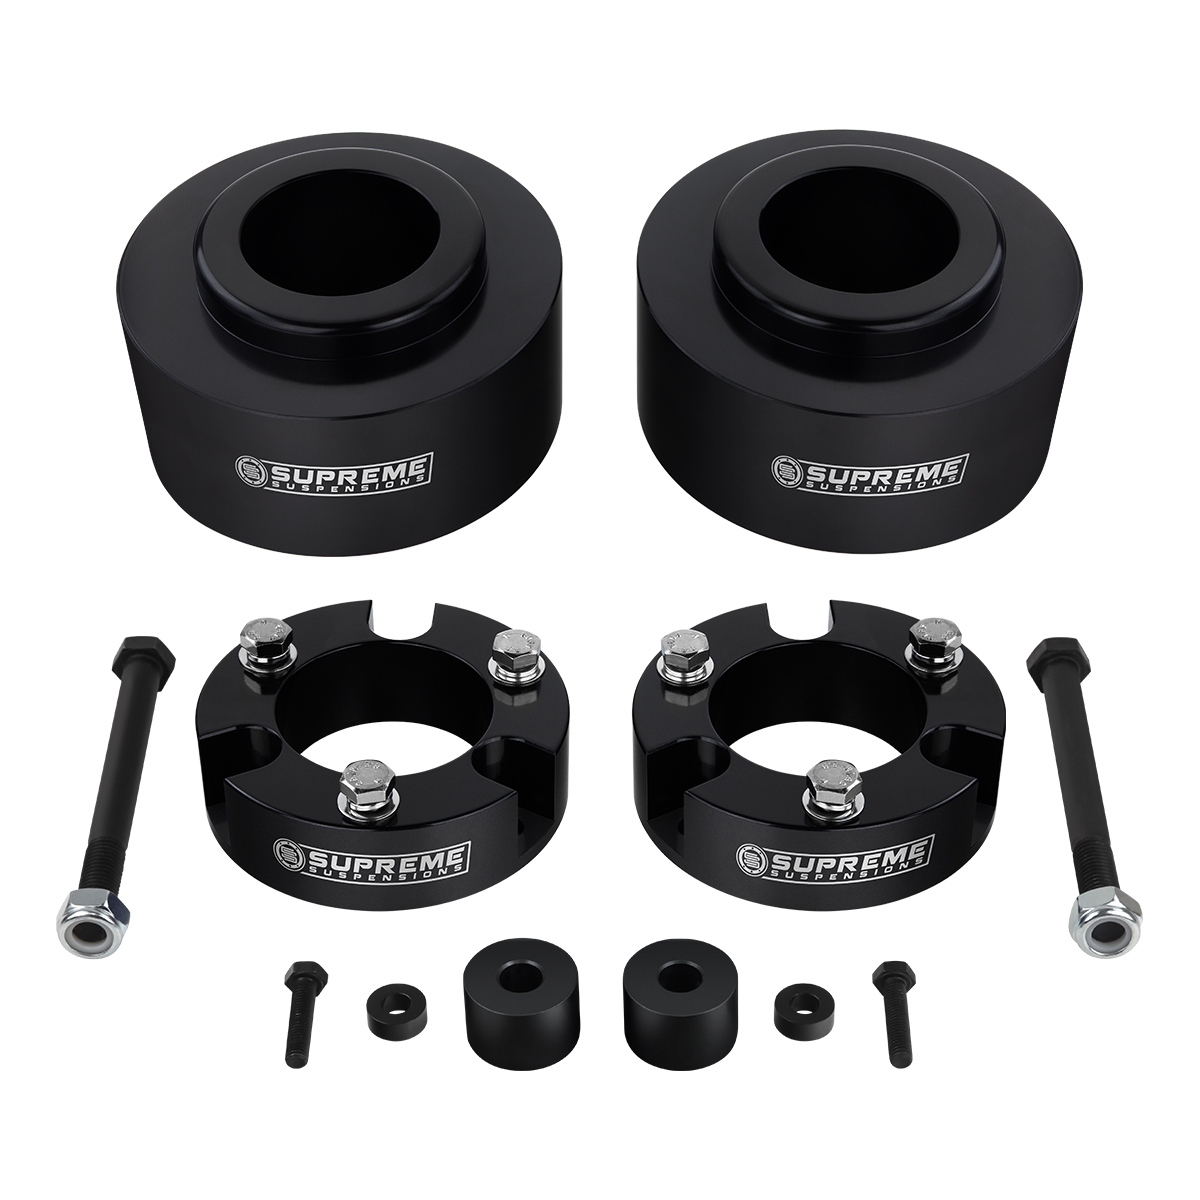 Full Lift Kit for Toyota 4Runner and FJ Cruiser 3 Front Lift Strut Spacers 2 Rear Lift Spring Spacers Differential Drop Kit 2WD 4WD Supreme Suspensions